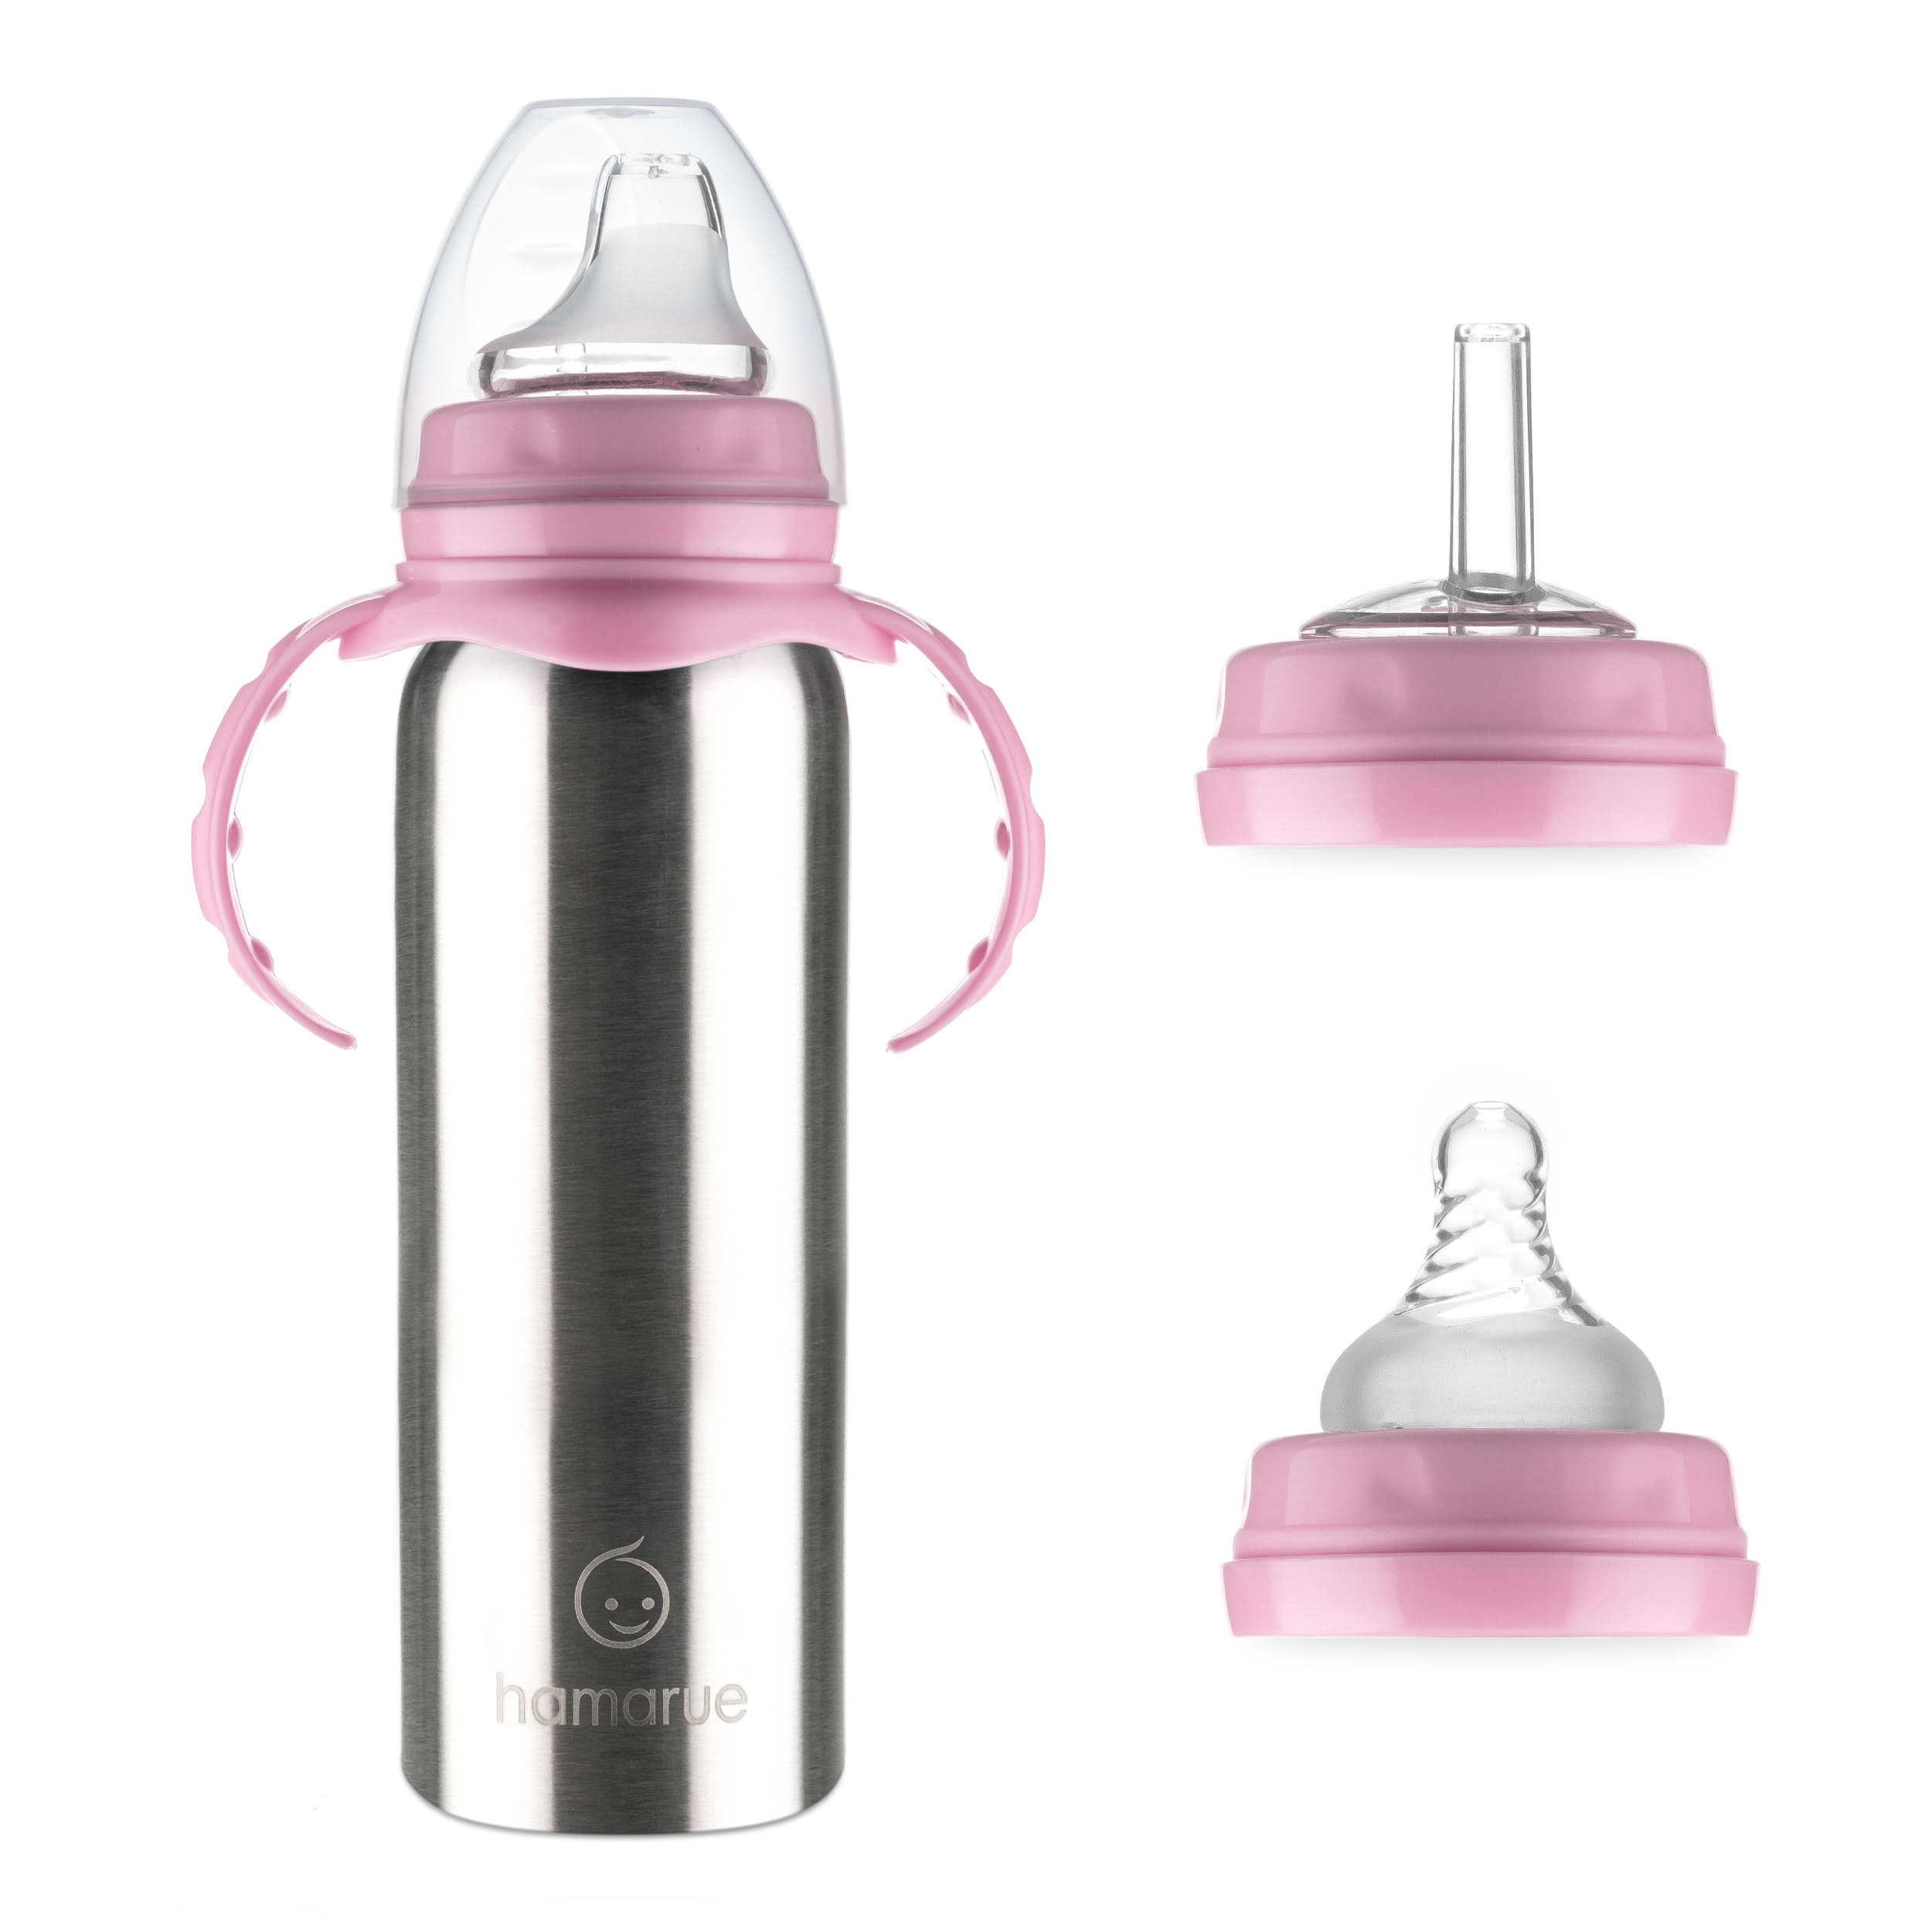 https://www.hamarue.com/wp-content/uploads/2019/08/Stainless-Straw-Cup-With-Handles-For-Toddlers.jpg